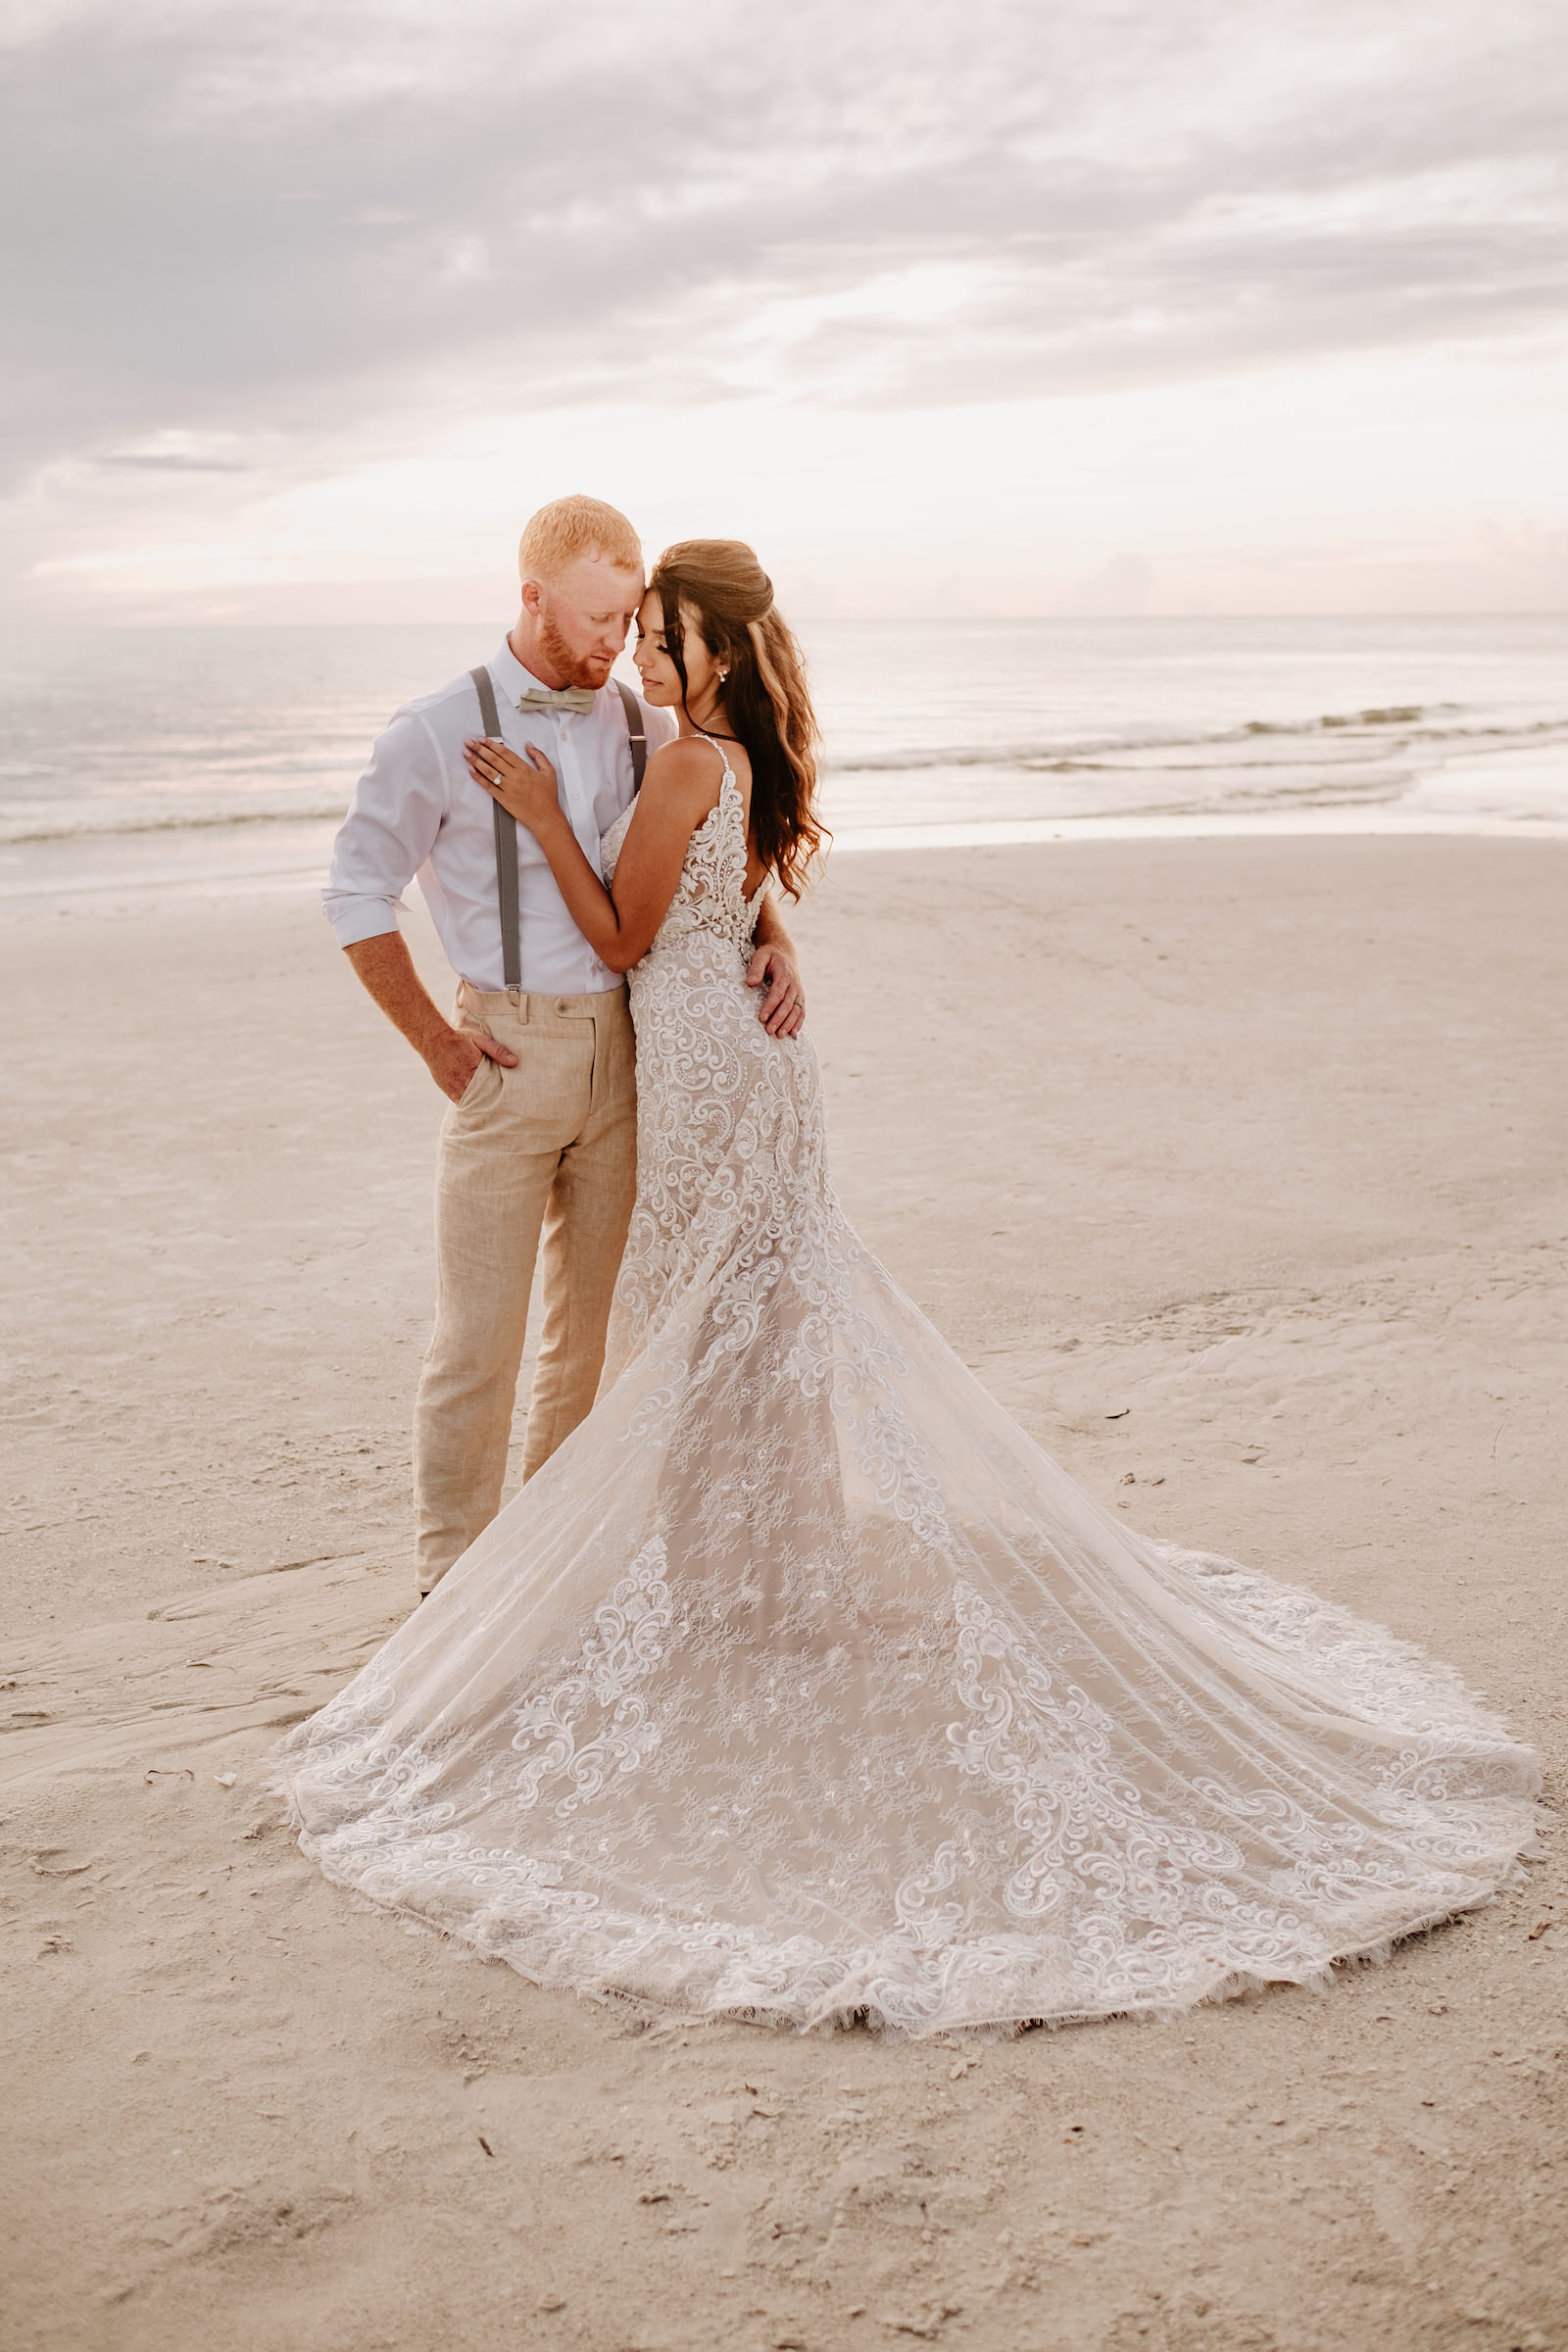 Outdoor Bride and Groom Sunset Portrait at Wedding Venue Hilton Clearwater Beach | Allure Bridals Lace Low Back Spaghetti Strap Sheath Bridal Gown Wedding Dress | Groom Wearing Khaki Pants and Grey Suspenders with White Shirt and Bow Tie